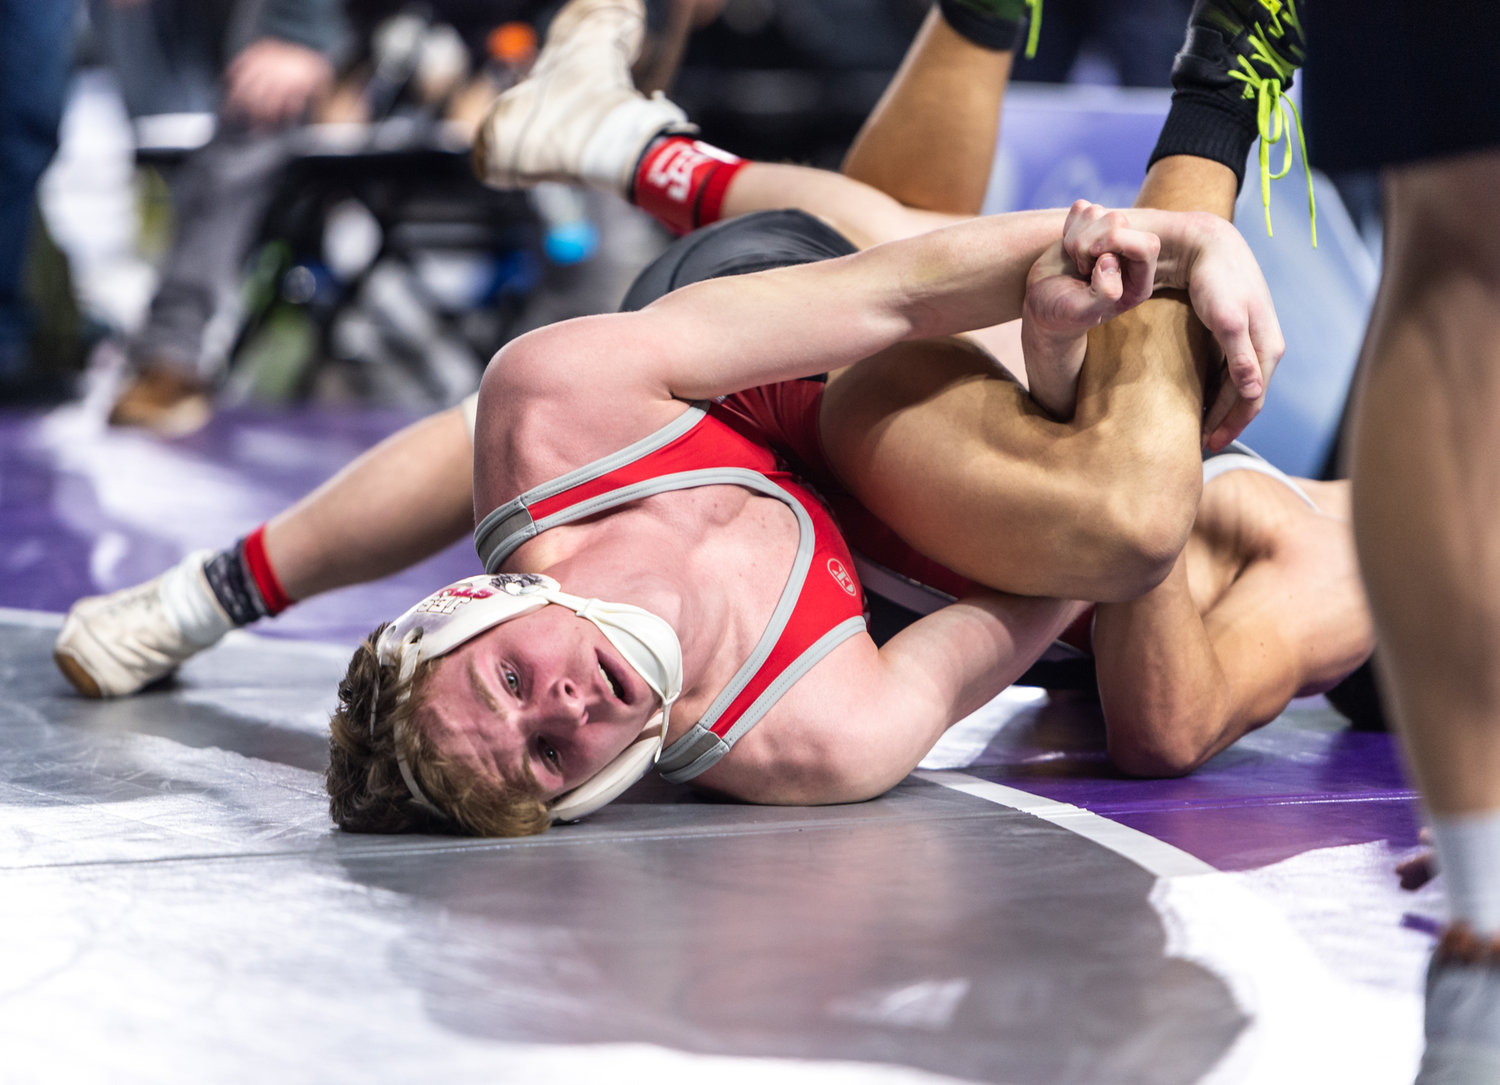 Davenport’s Brody Schillinger tries to withstand a pin against Toledo’s Bomani Birdwell, 152 pounds, in a first-round match at Mat Classic XXXIV on Friday, February 17, 2023, at the Tacoma Dome. (Joshua Hart/For The Chronicle)